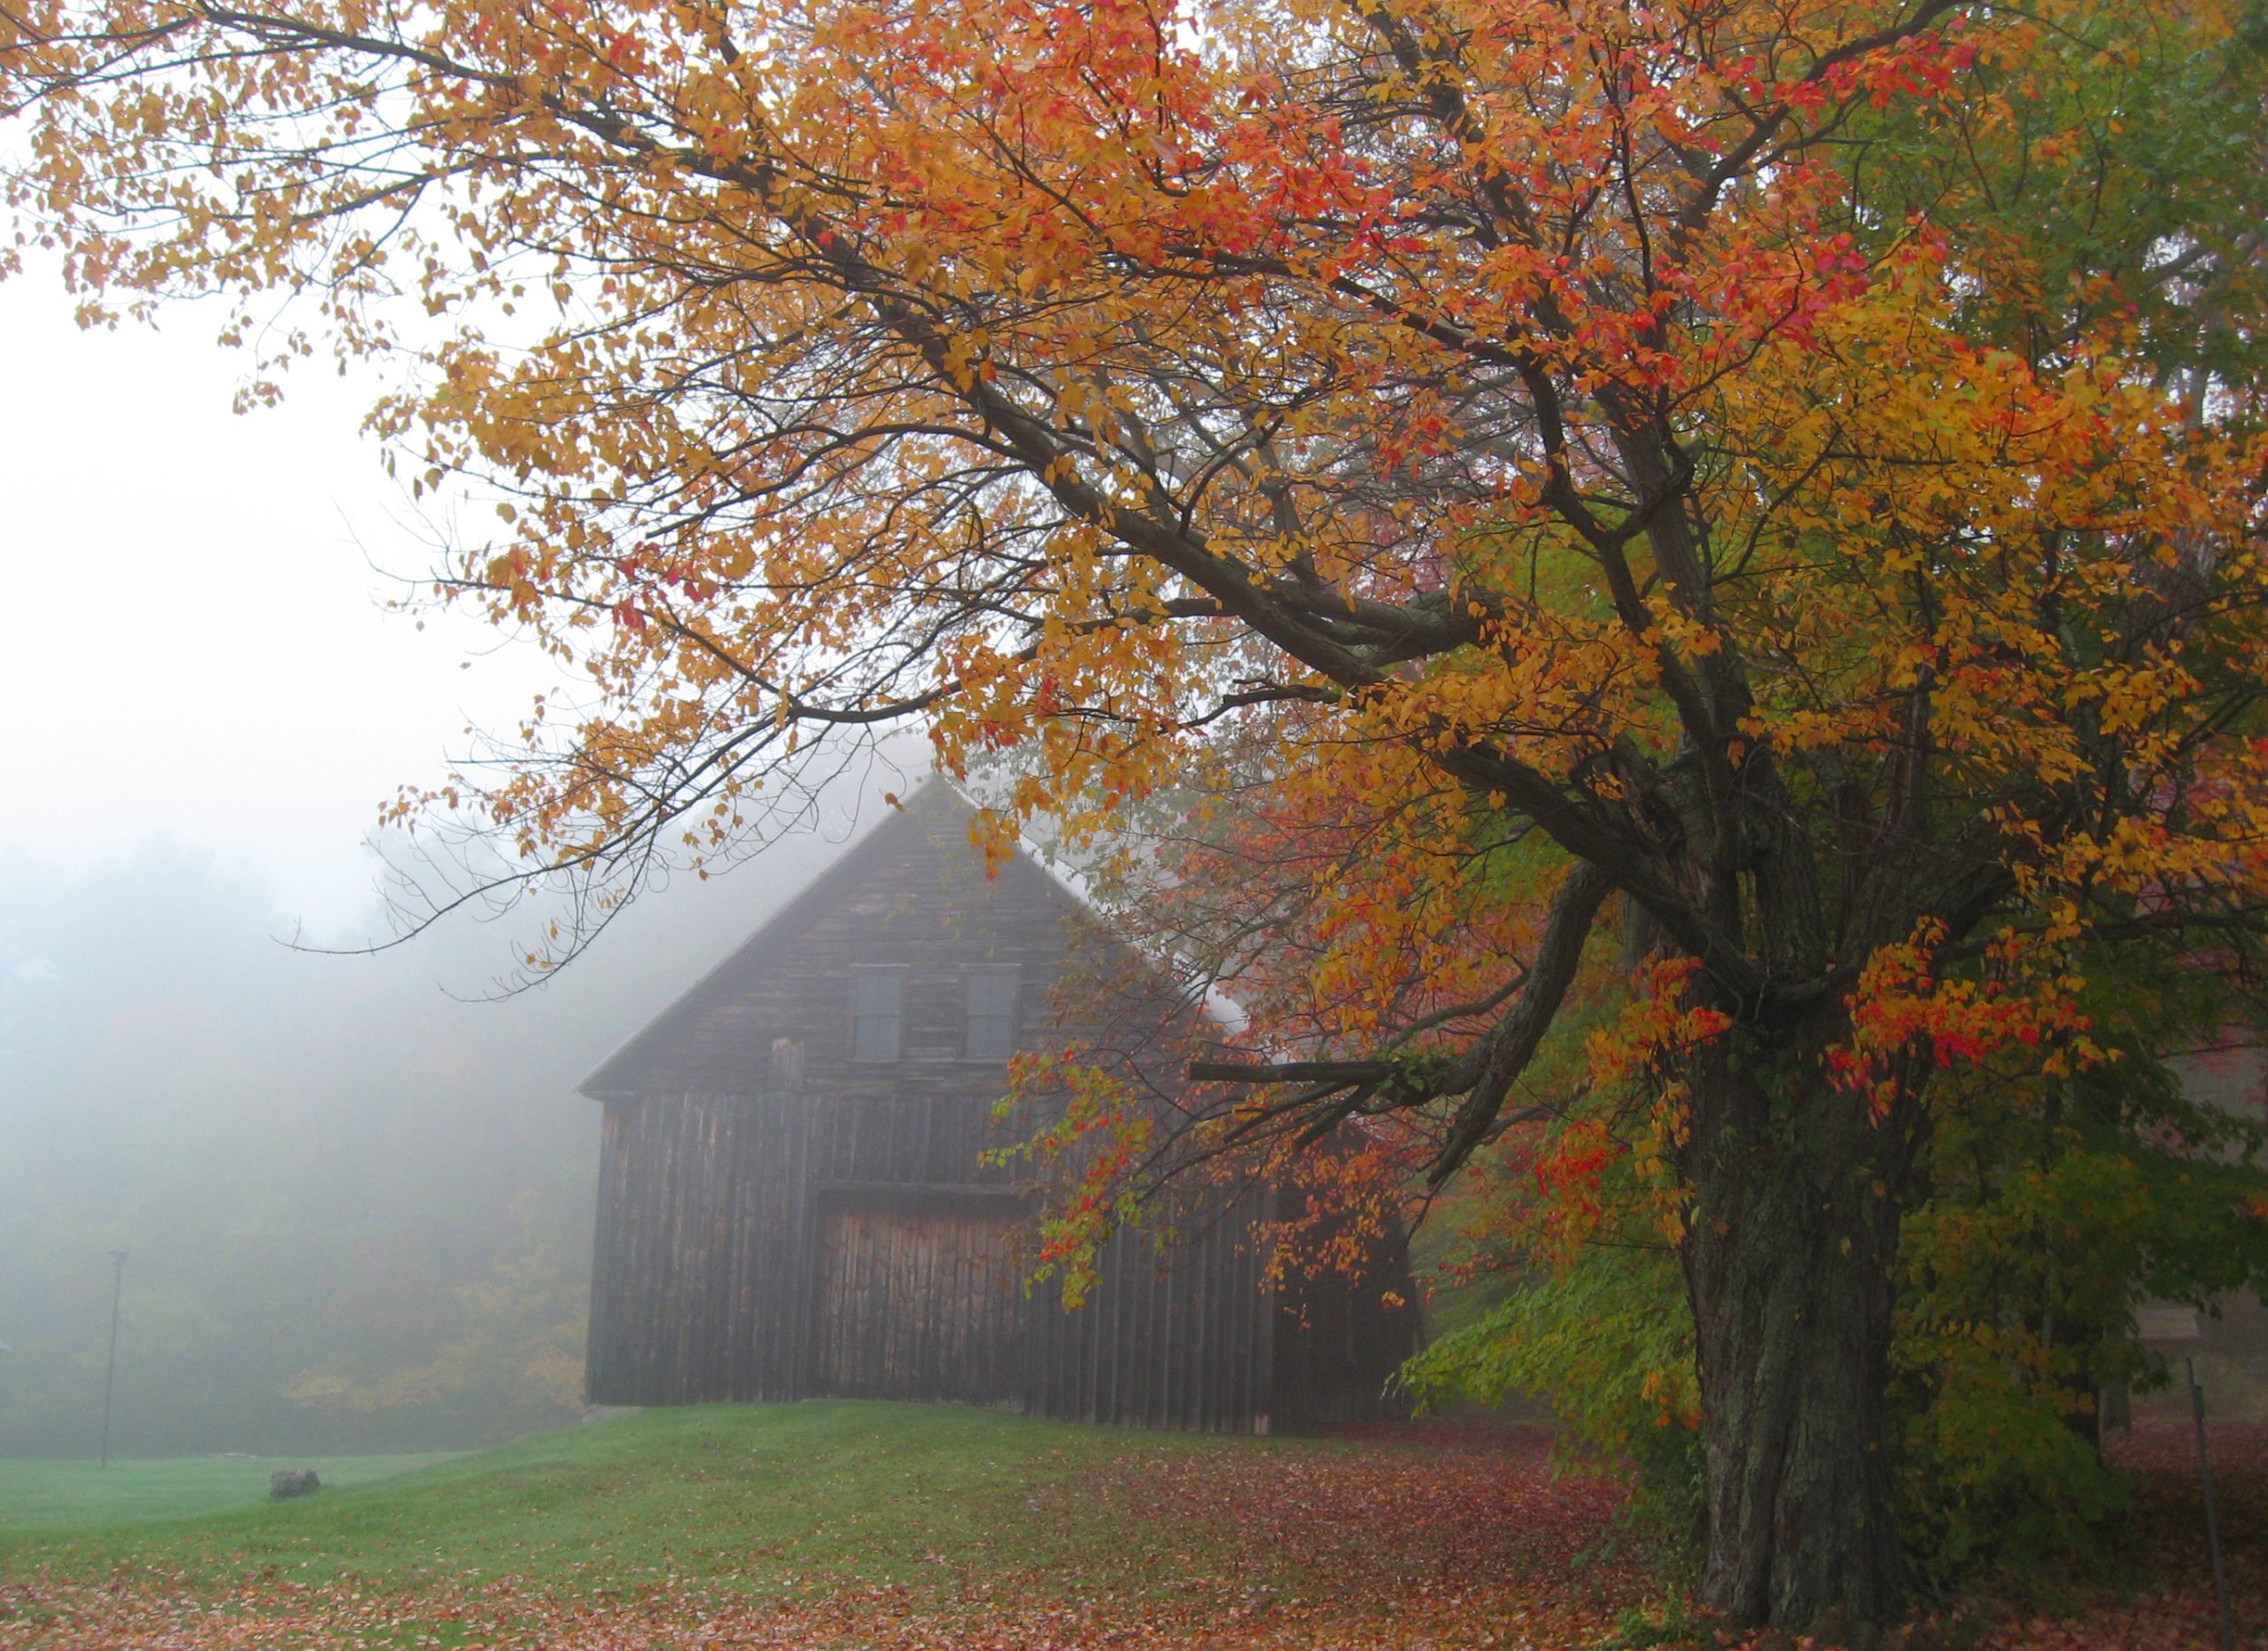 Barn In Chester, Nh On A Fall Morning (user submitted)